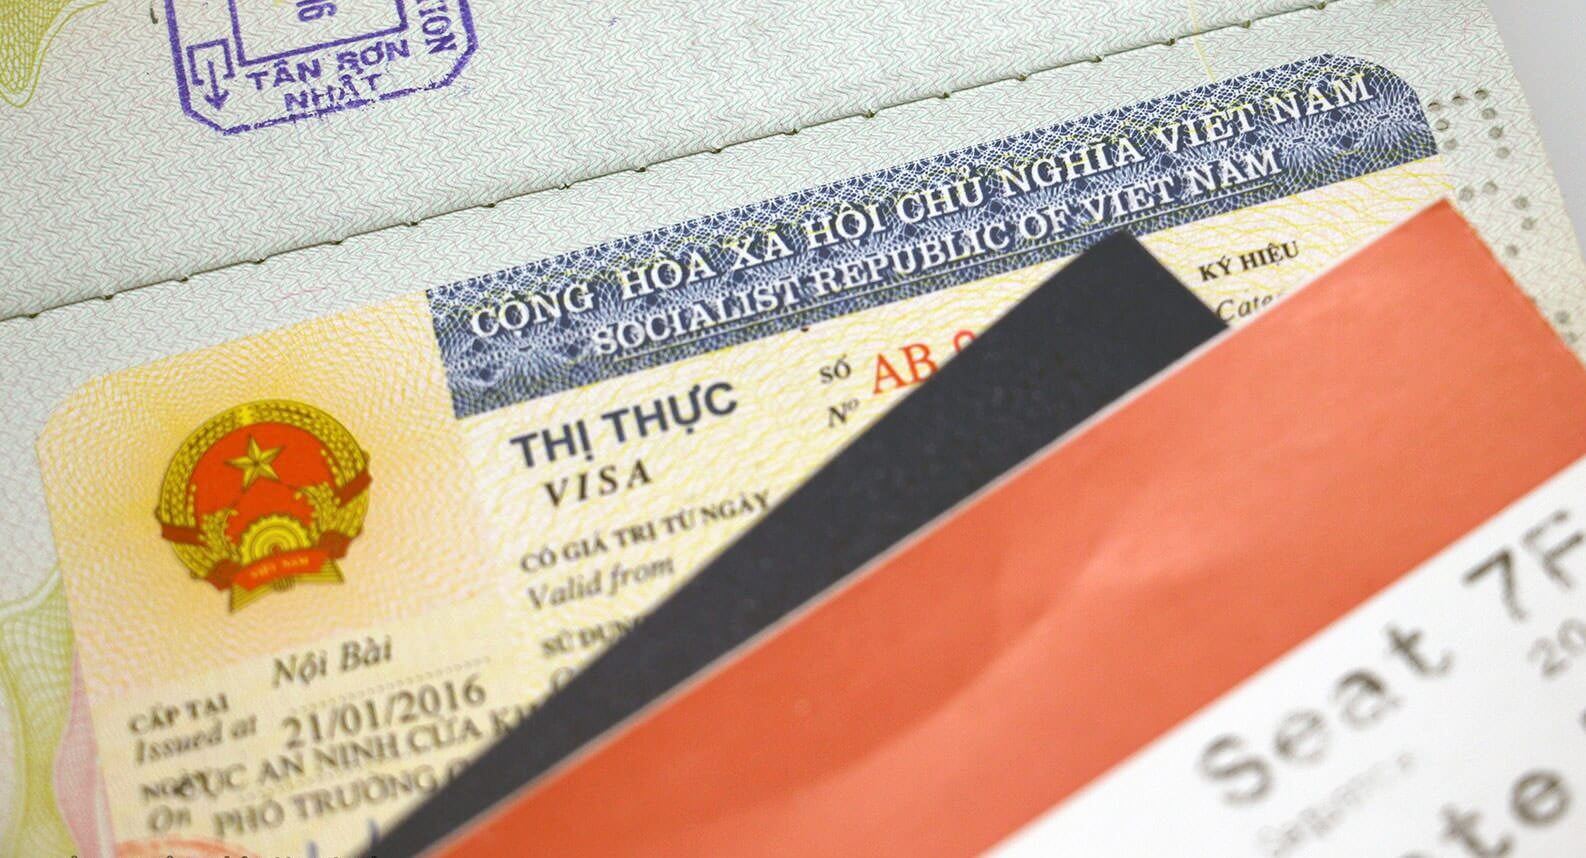 6 months or 1 year visa on arrival to Vietnam